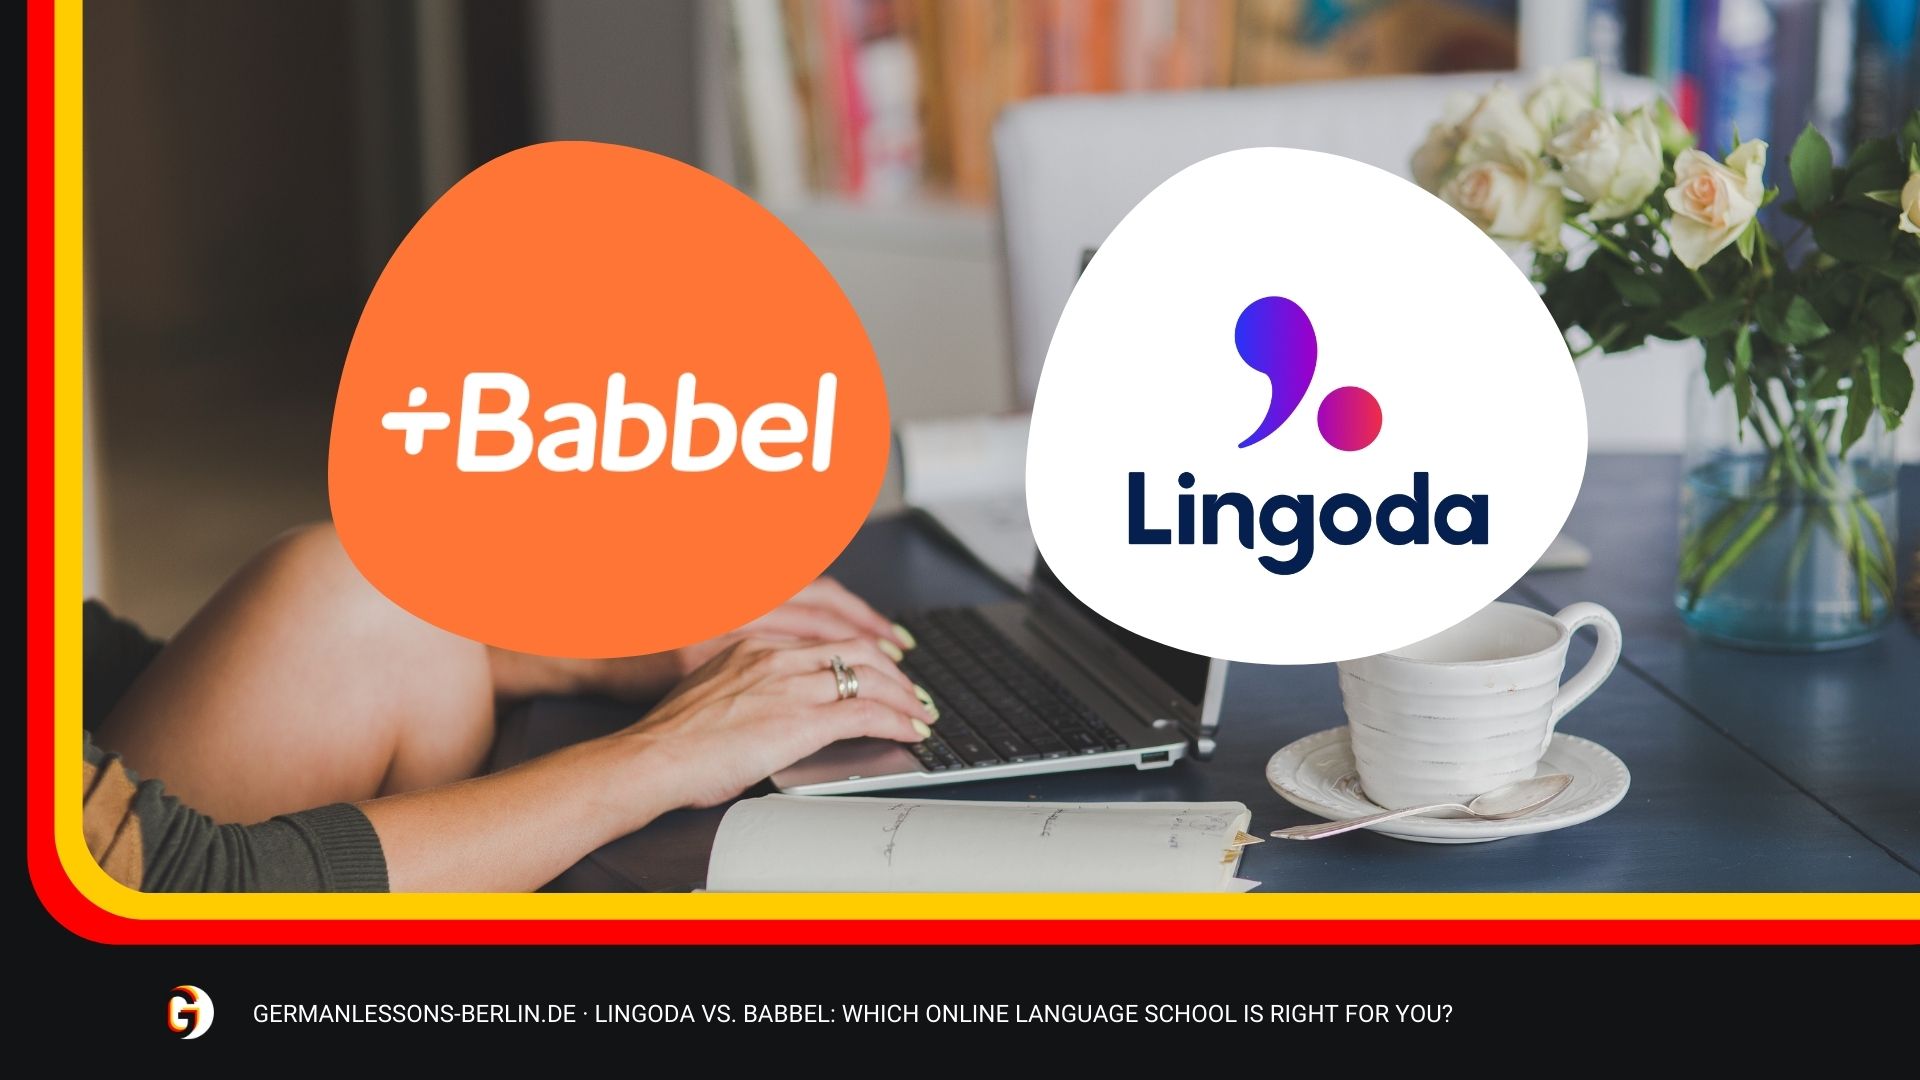 Lingoda Vs. Babbel: Which Online Language School Is Right For You?